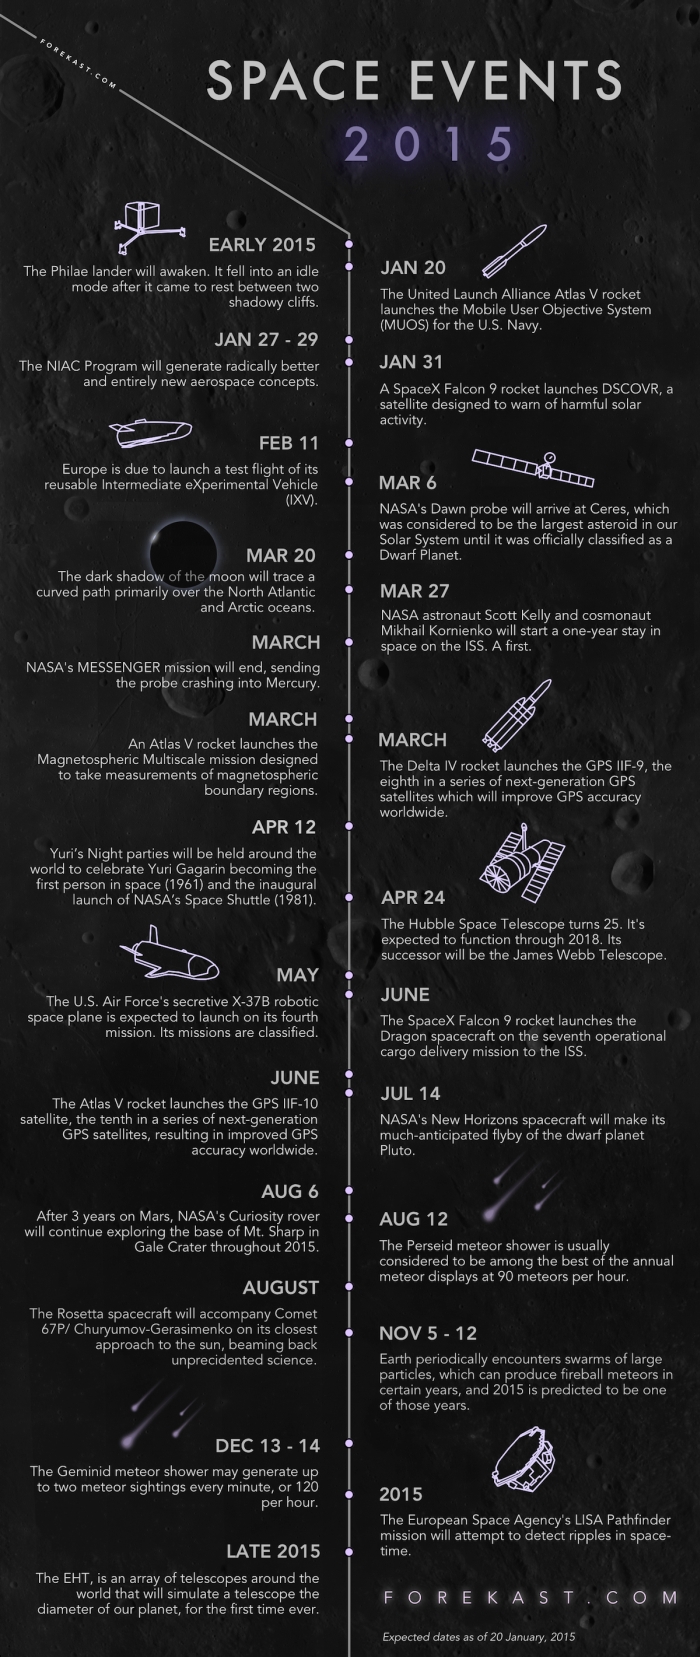 Space Events That Will Happen In 2015